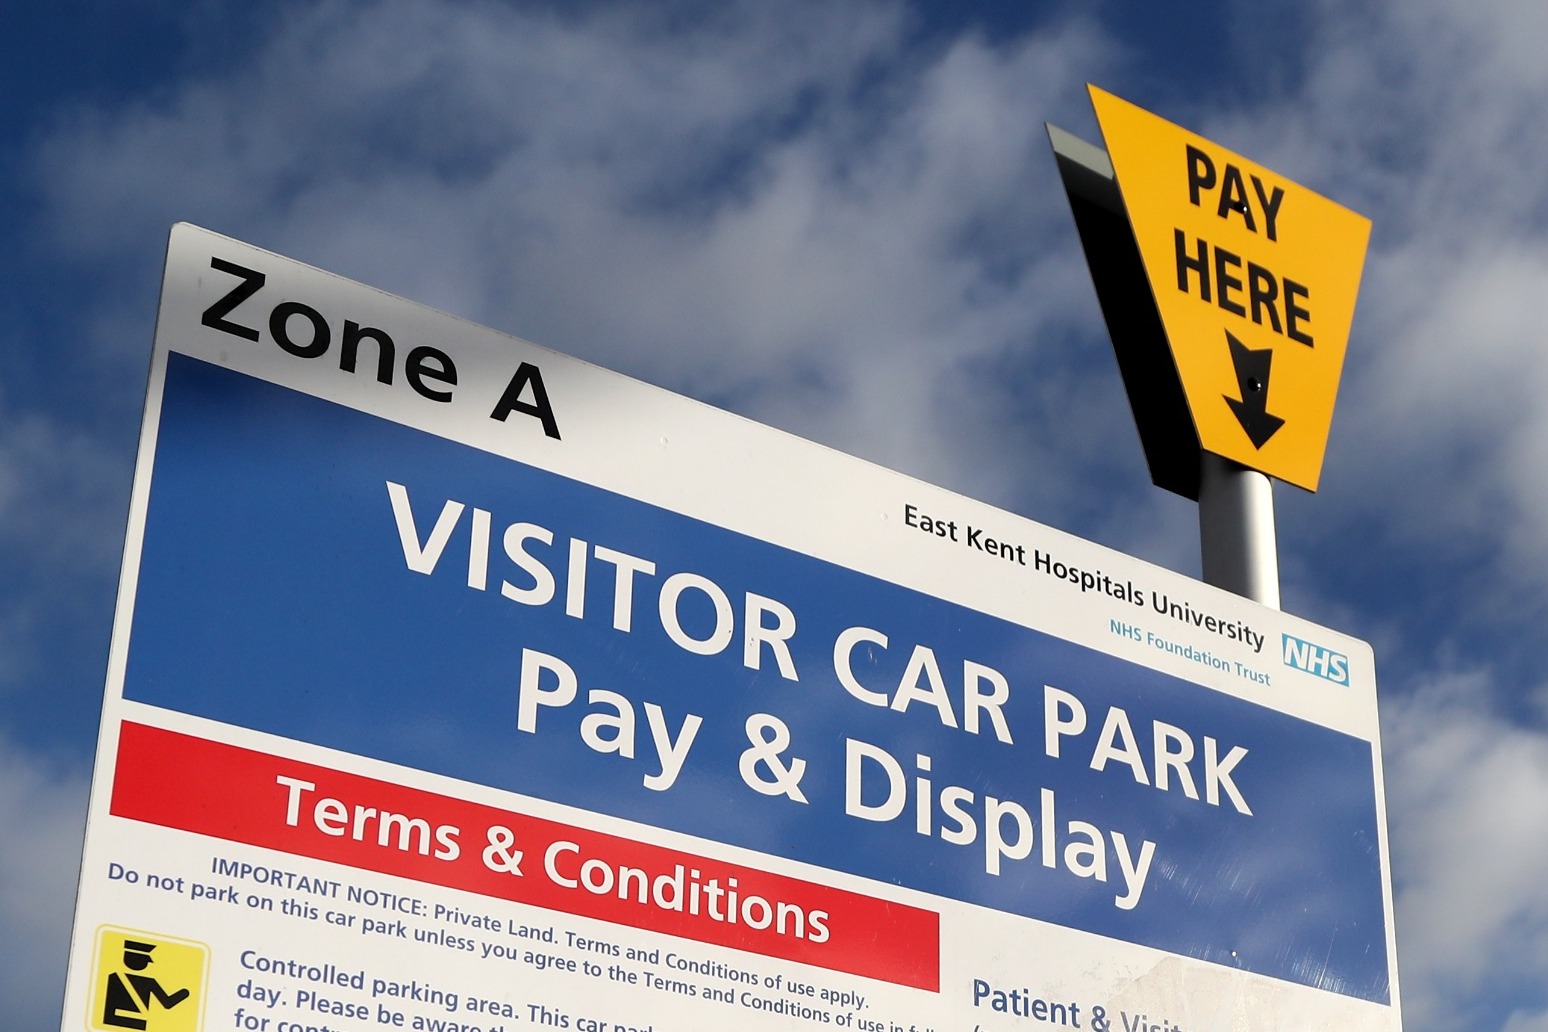 Car parking fees at hospitals soar by 50% in a year, figures show 